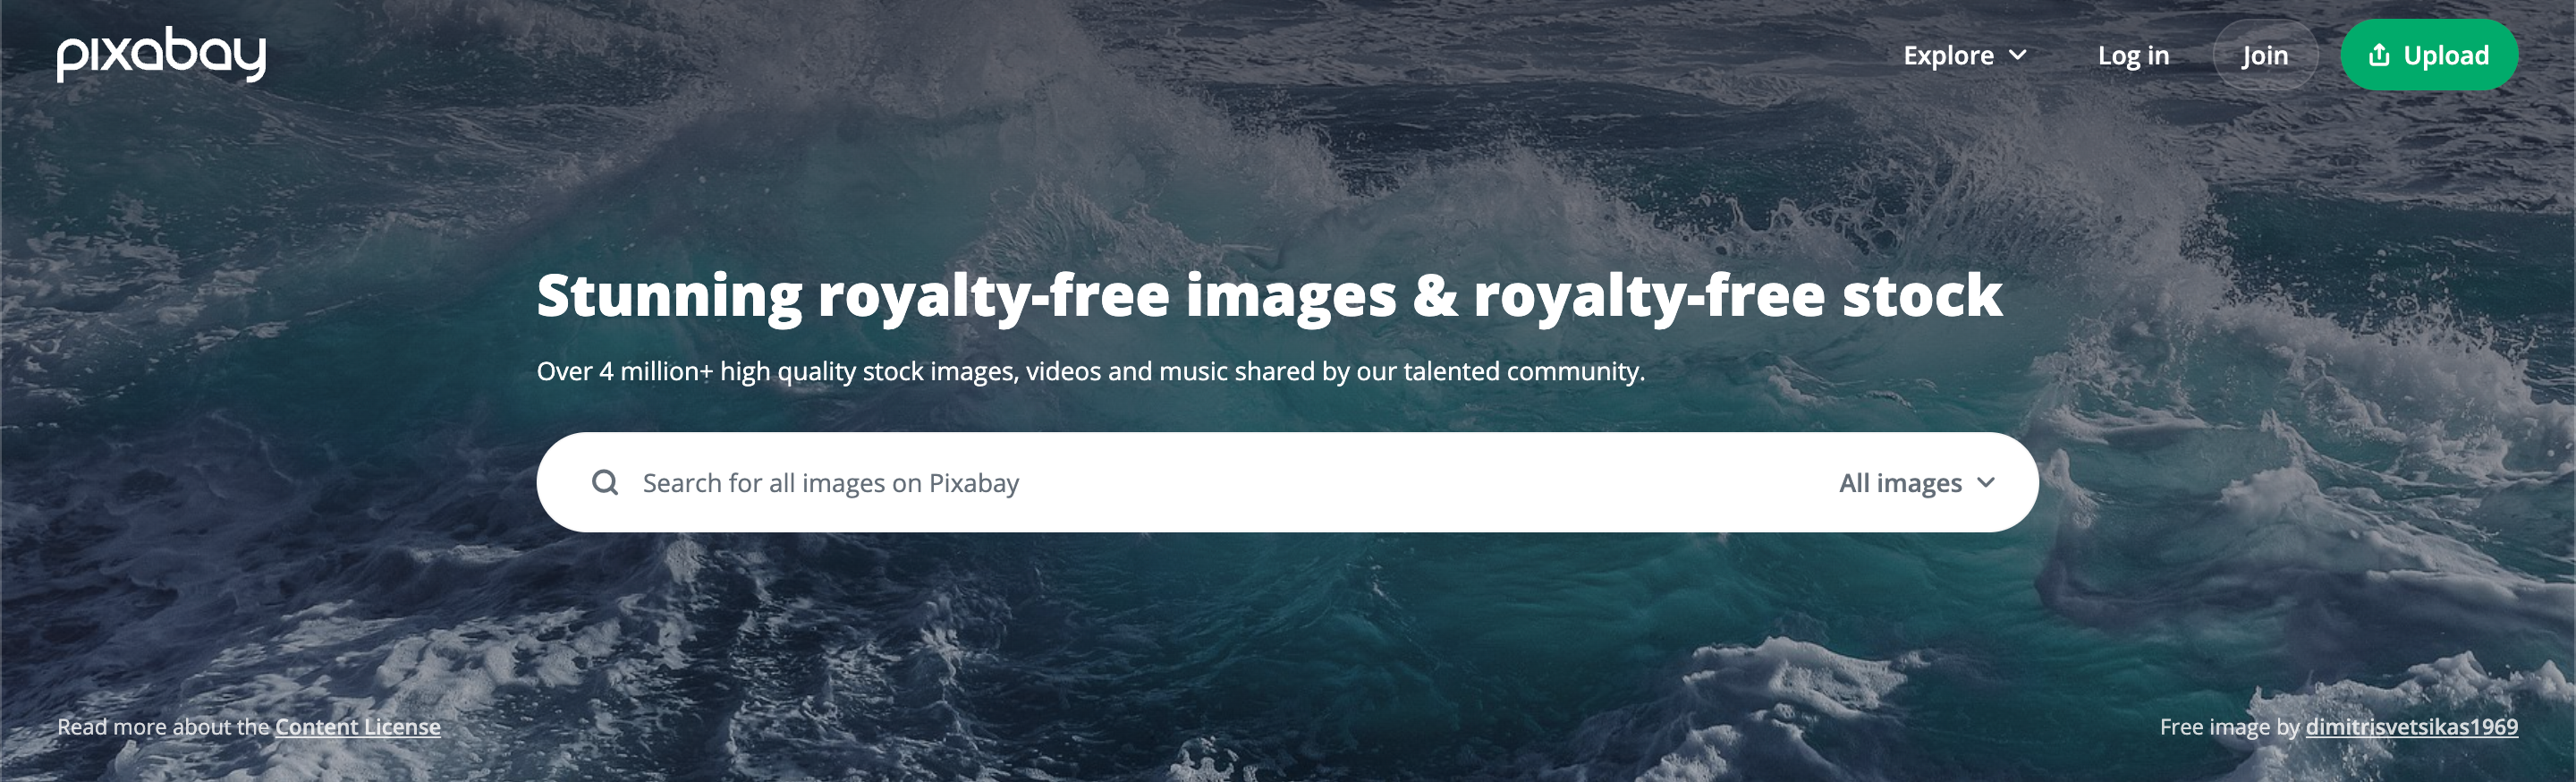 Pixabay is a page that over 4 million stock content uploaded for you to download.